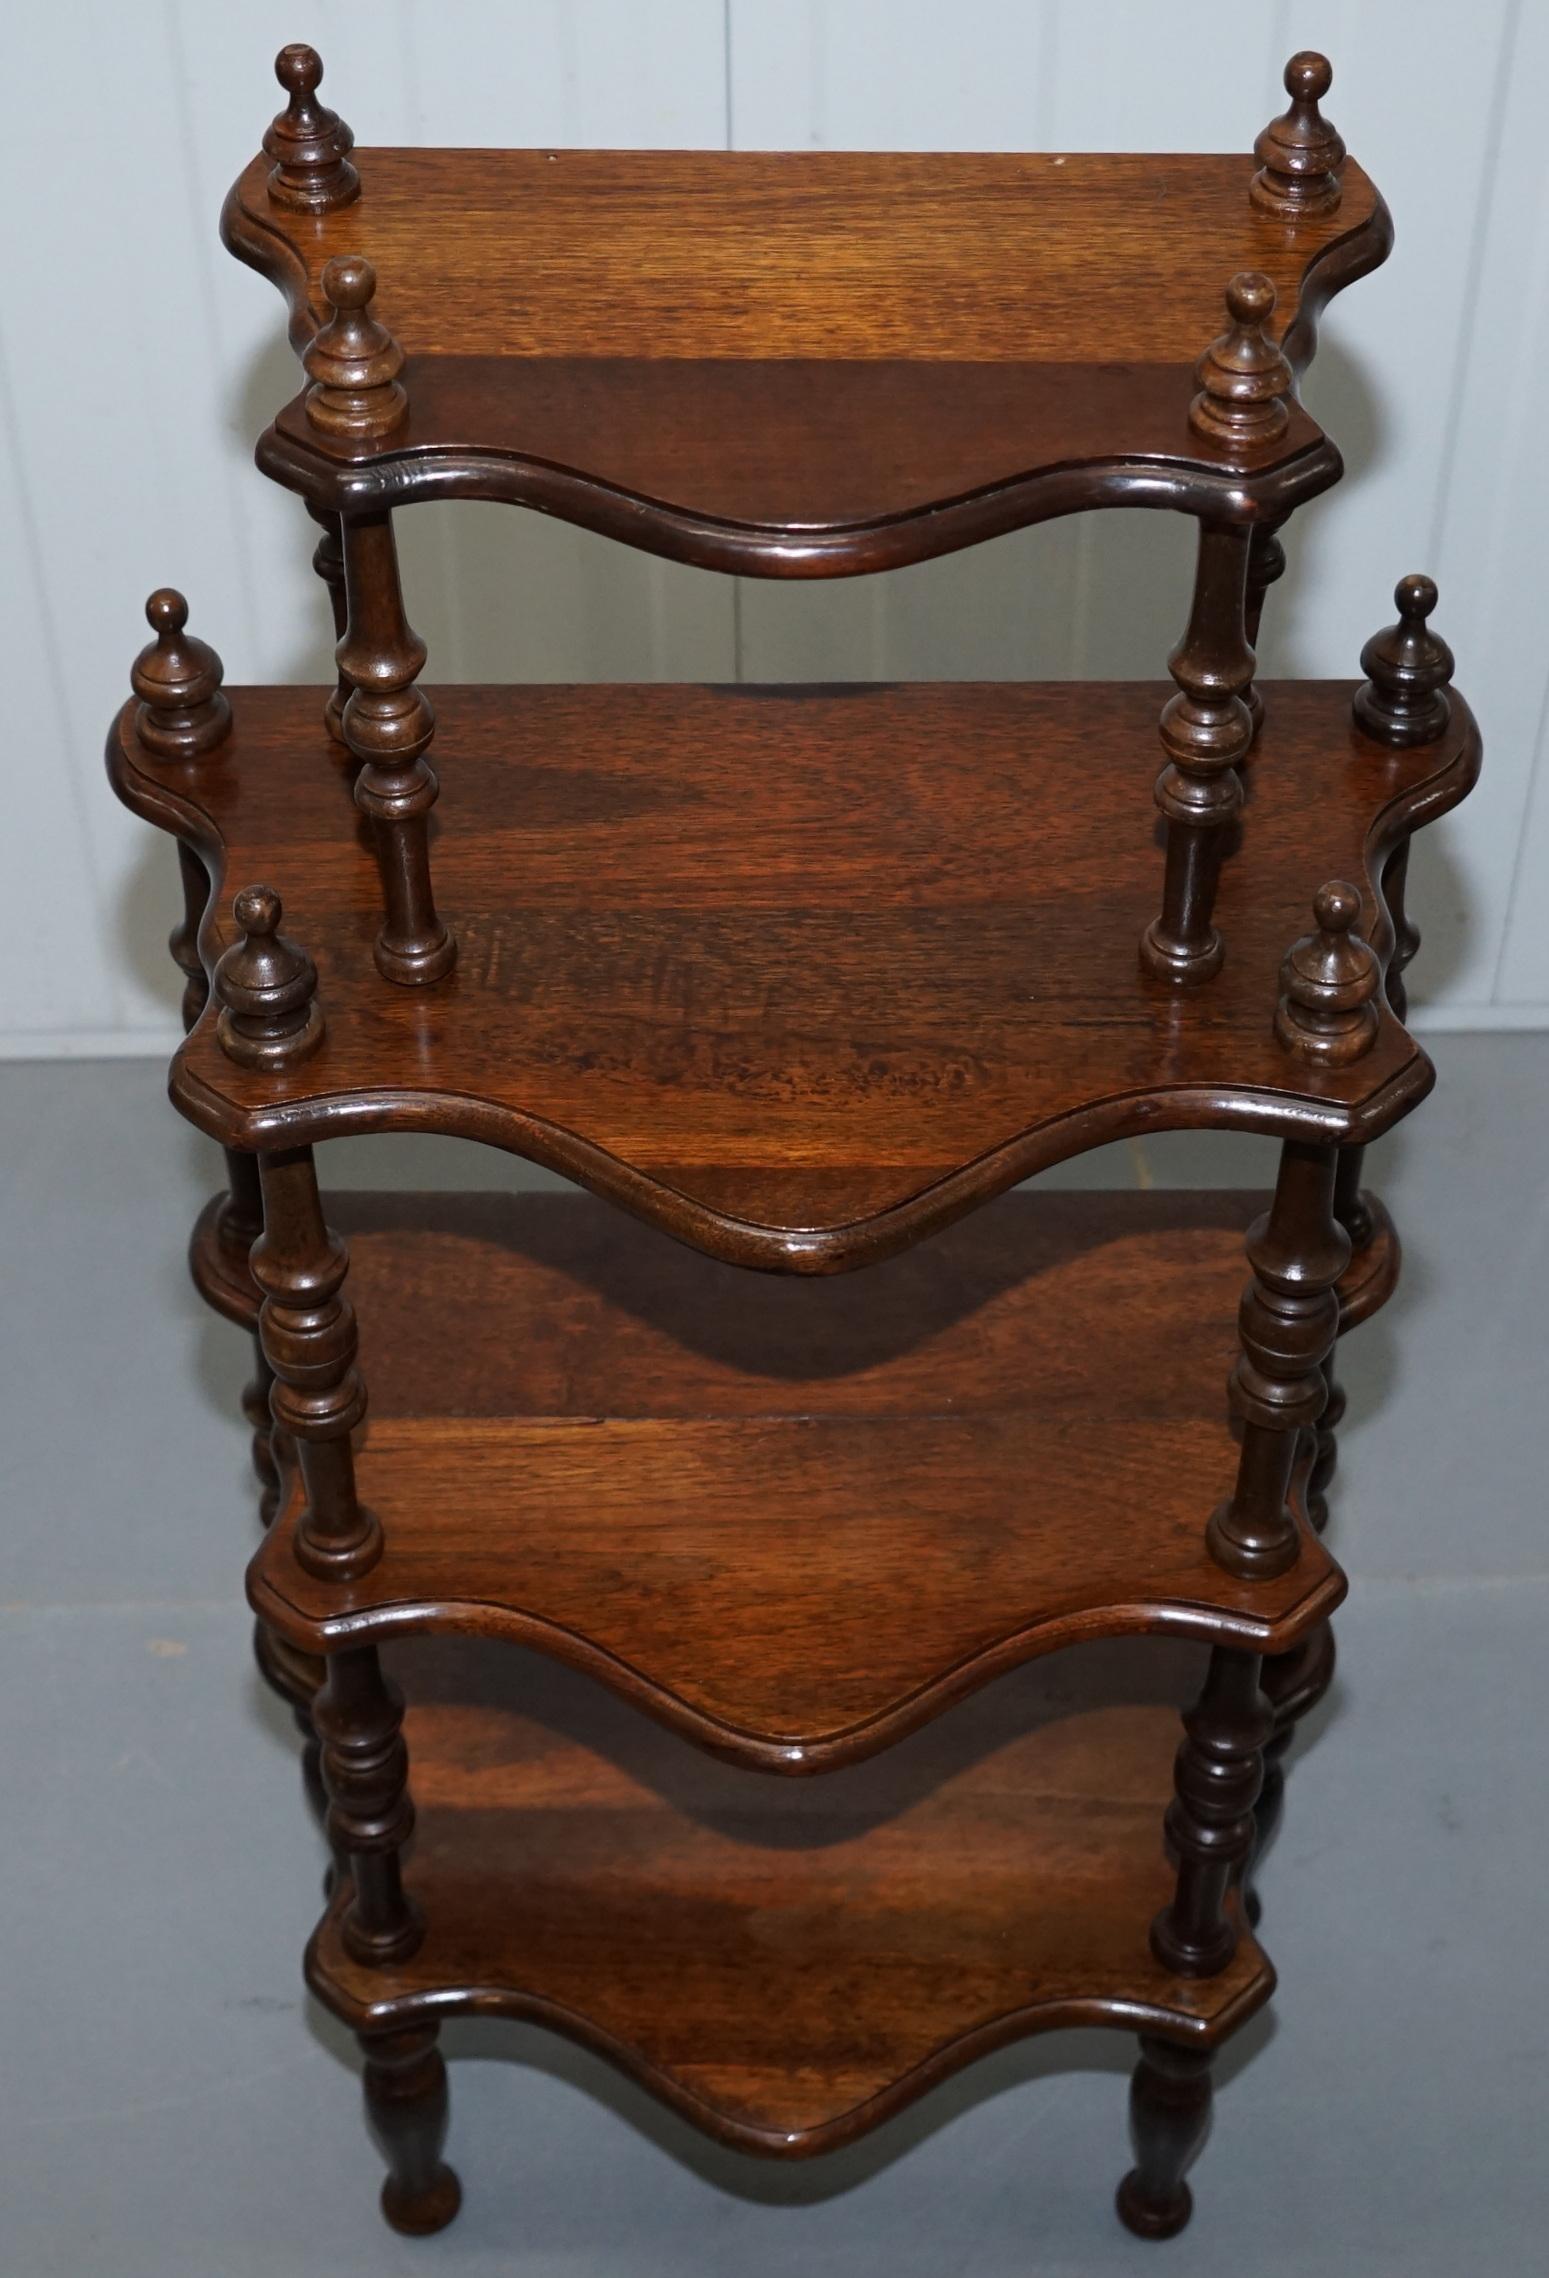 English Lovely Small Mahogany Whatnot Bookcase Nicely Turned Pillars Functional Piece